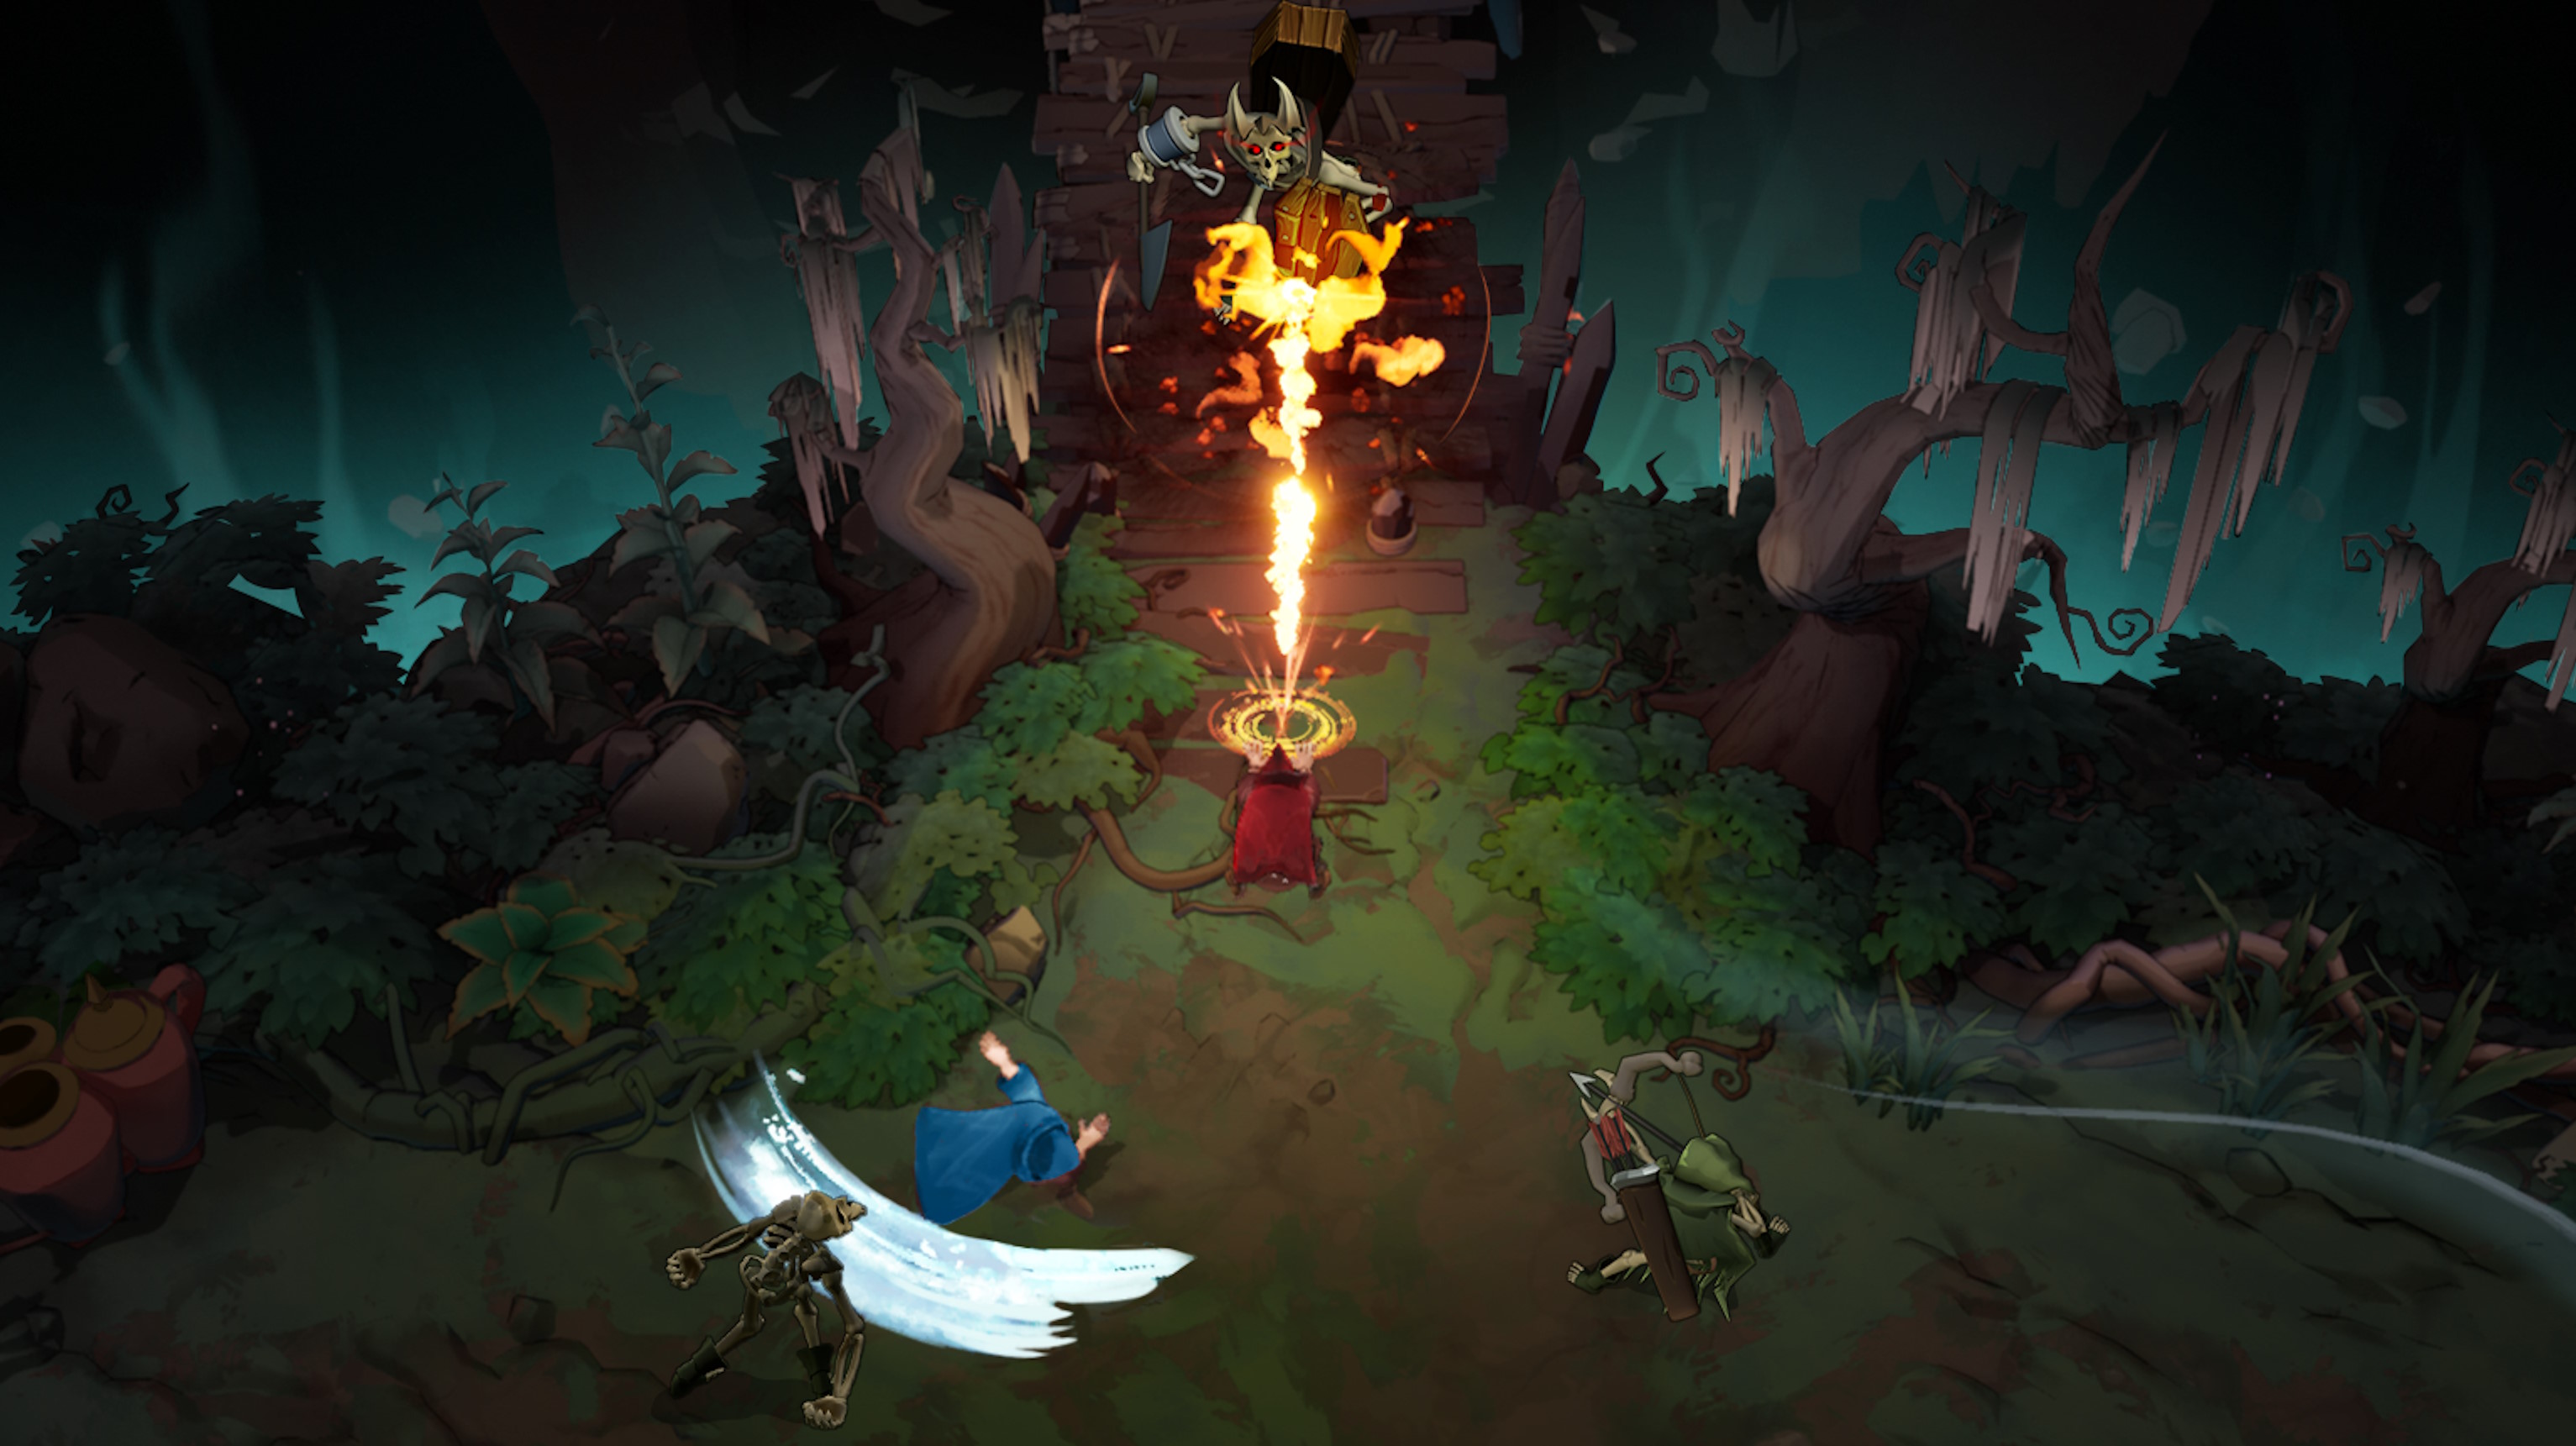  Wizard of Legend is getting a sequel with 'improved 3D graphics, an expanded storyline, and even online multiplayer'
 